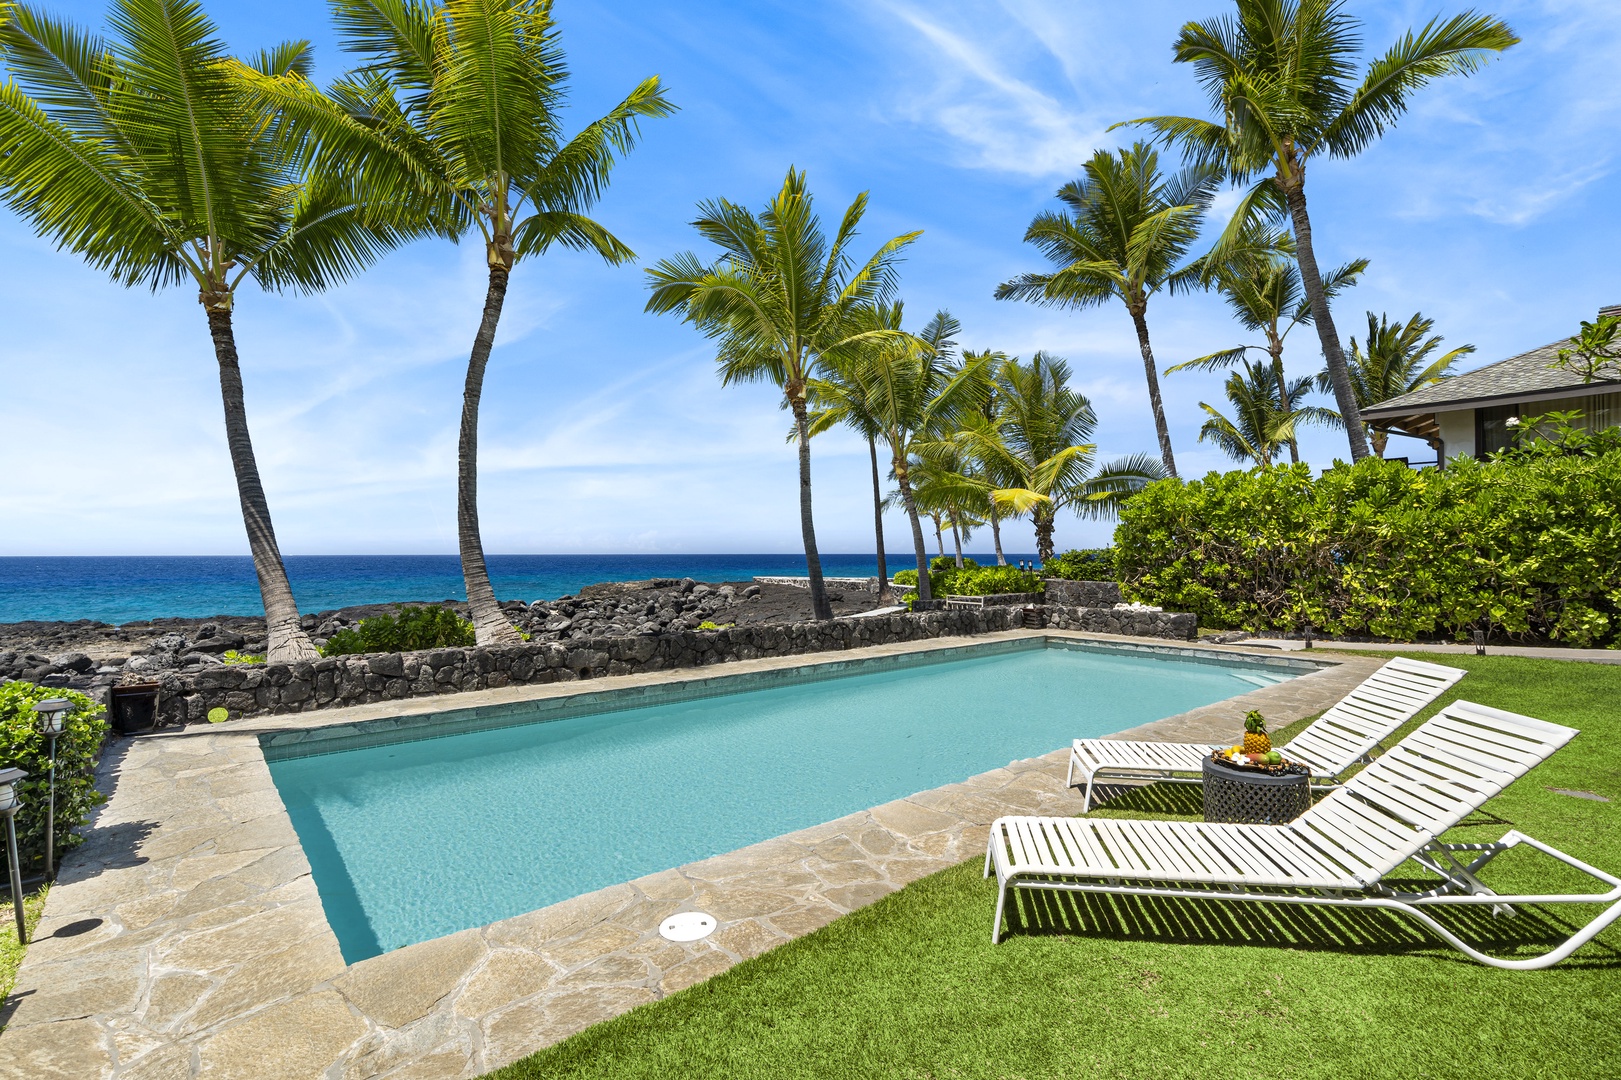 Kailua Kona Vacation Rentals, Kona Blue - Views overlooking the pool from the South end of the Lanai